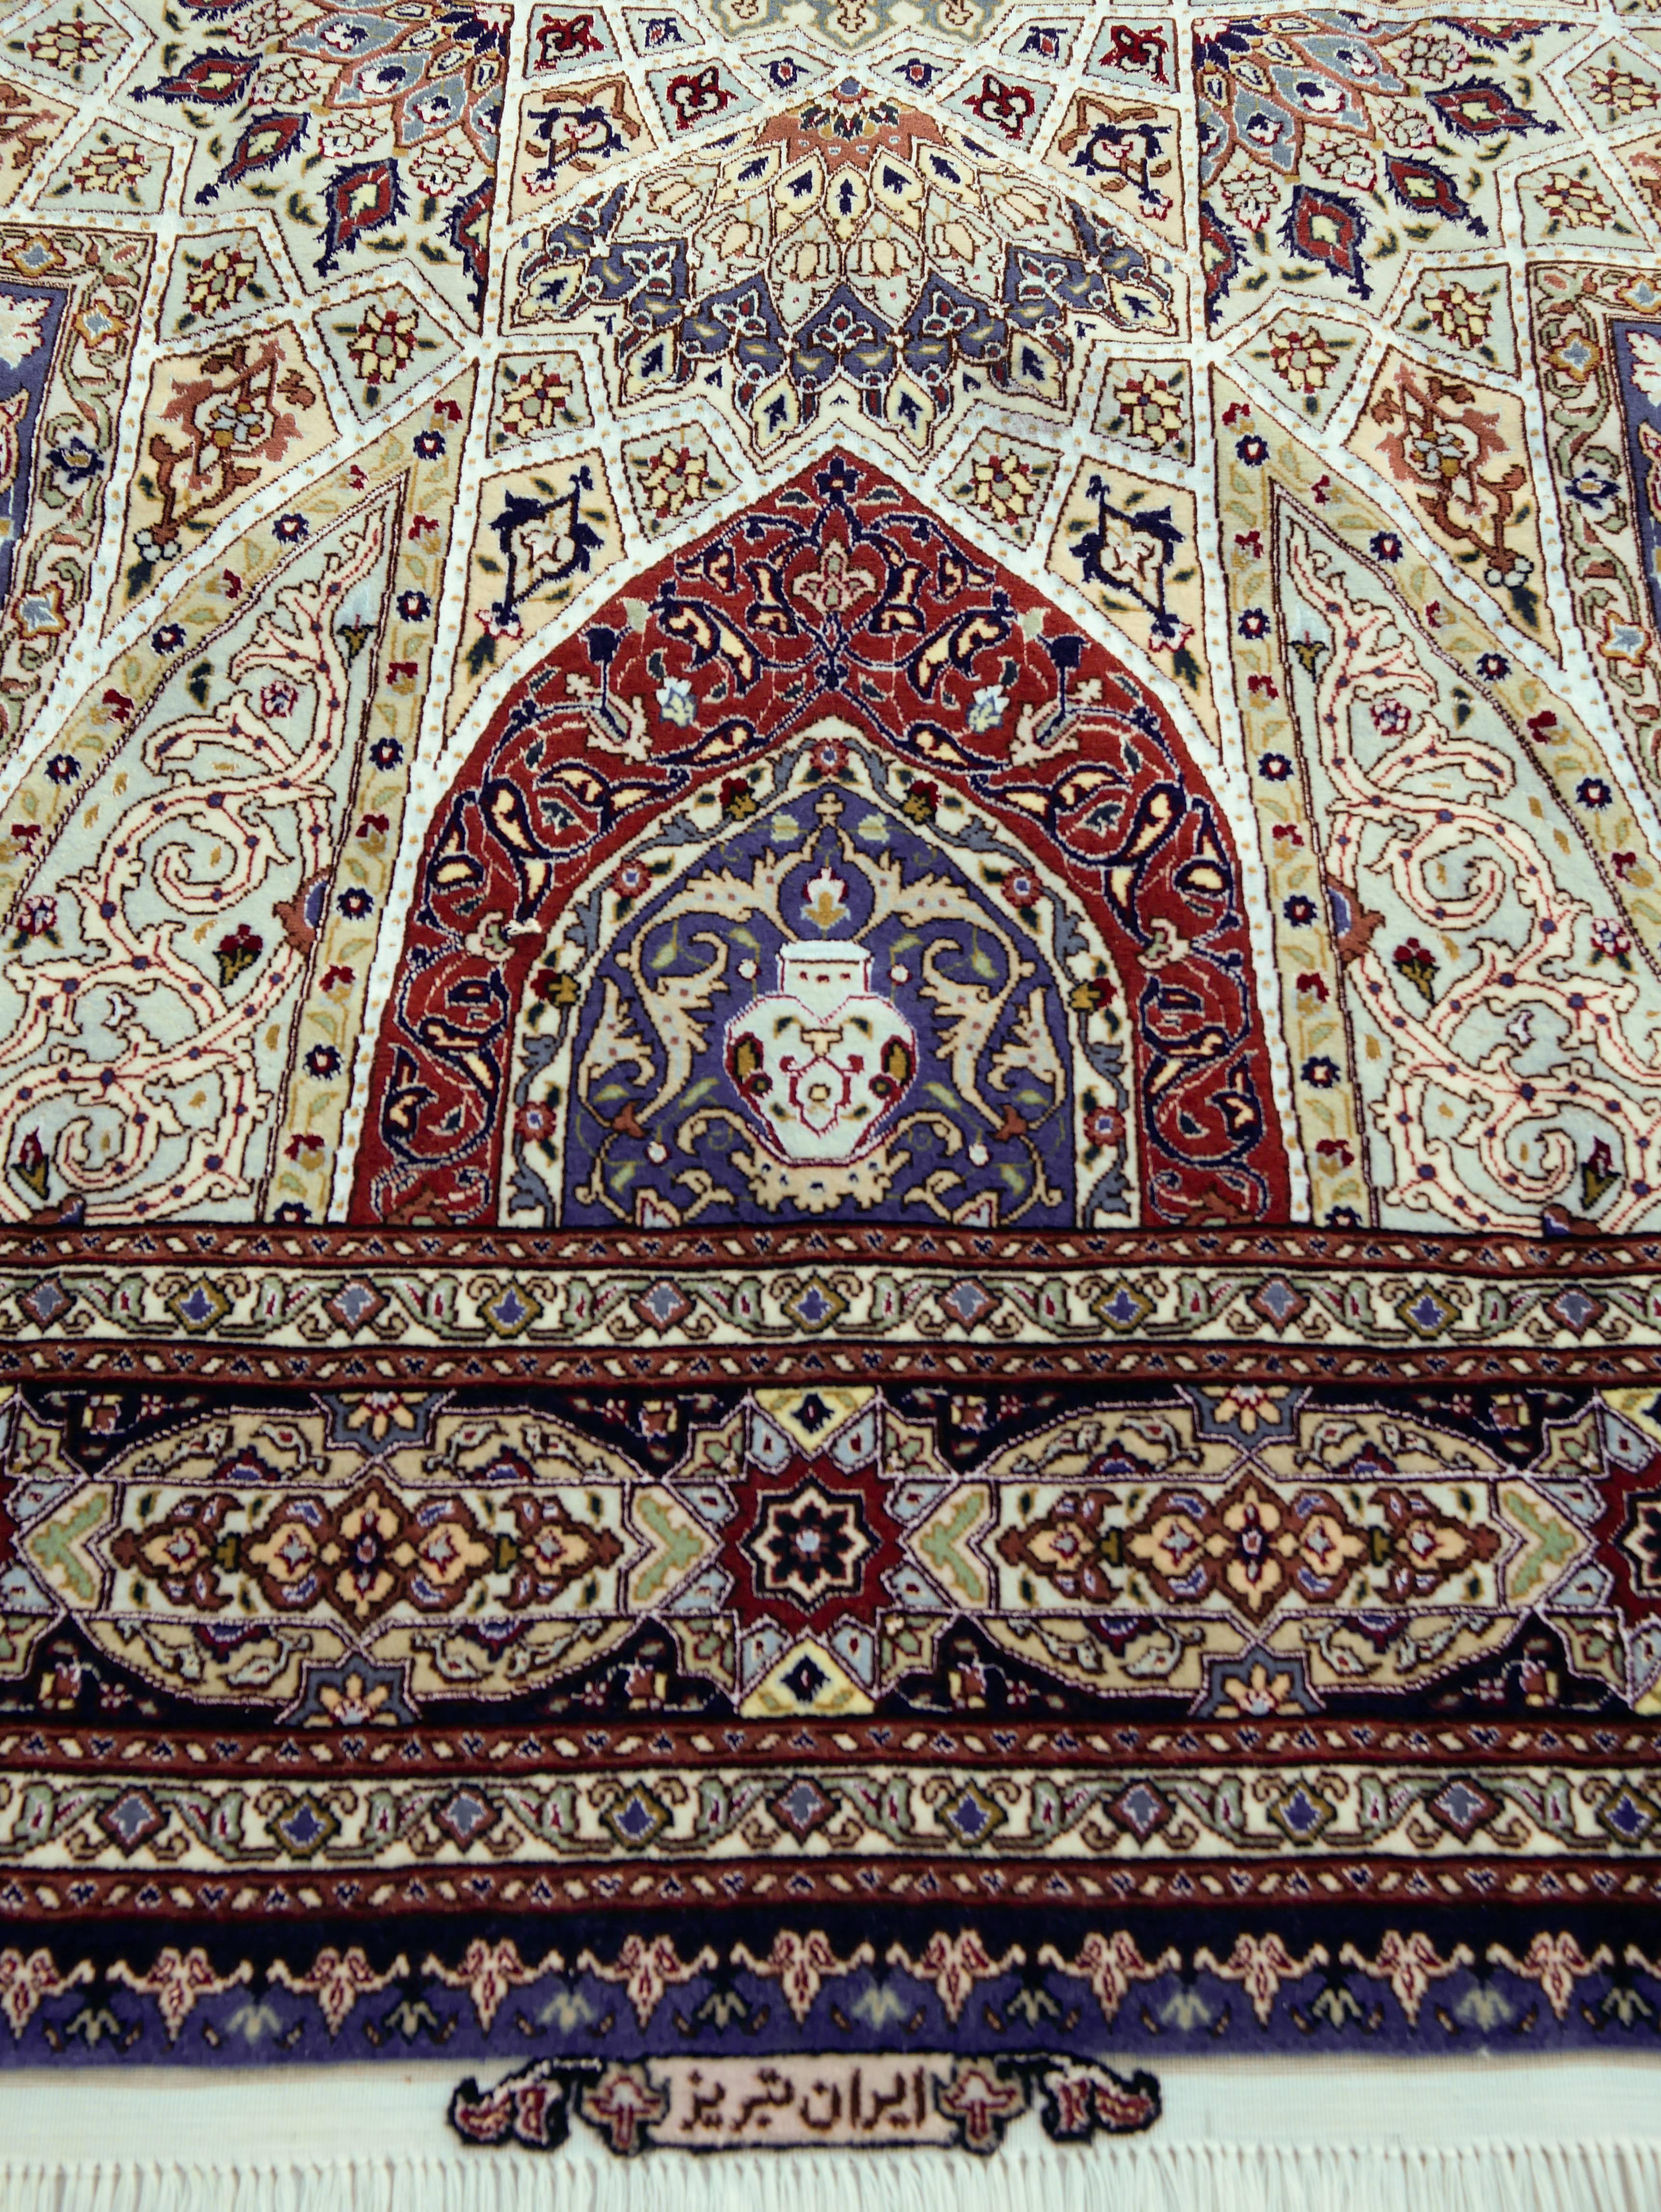 This is a gorgeous new, never ever used authentic Persian 60 Raj (super fine) Tabriz carpet in Isfahan design.
It is said that many Isfahan master weavers draw their inspiration from the ceiling mosaics in the city’s Shah Mosque. This carpet